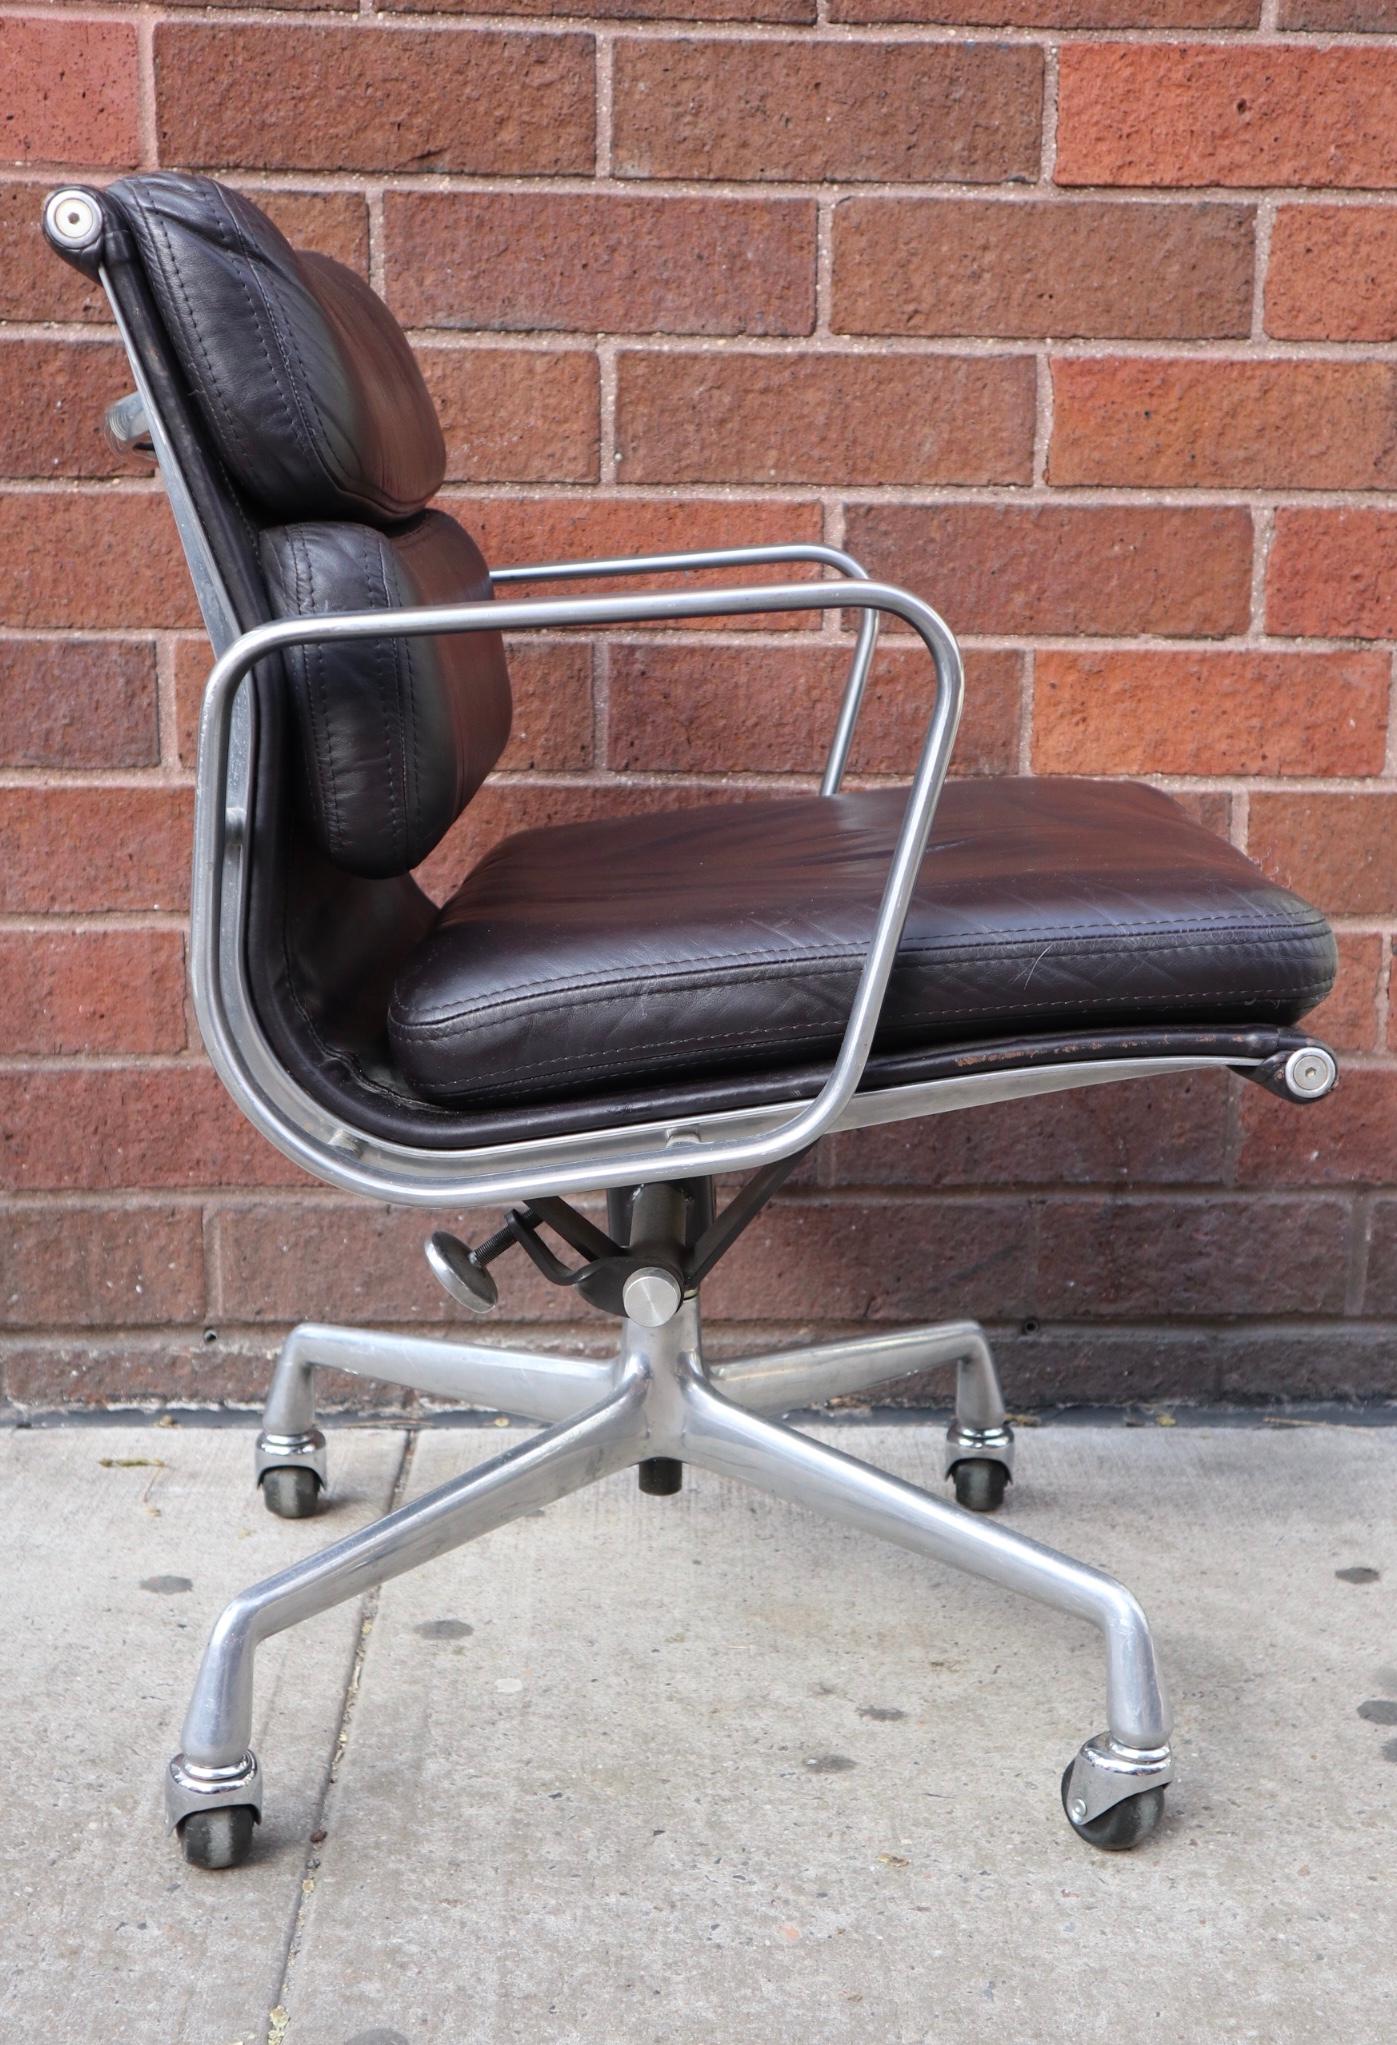 Fantastic Eames soft pad management desk chair. Gorgeous deep chocolate color on 4 star polished aluminum base. Chair swivels and tilts smoothly Signed Herman Miller. All wheels function without issue. No tears to the leather. In lovely shape with